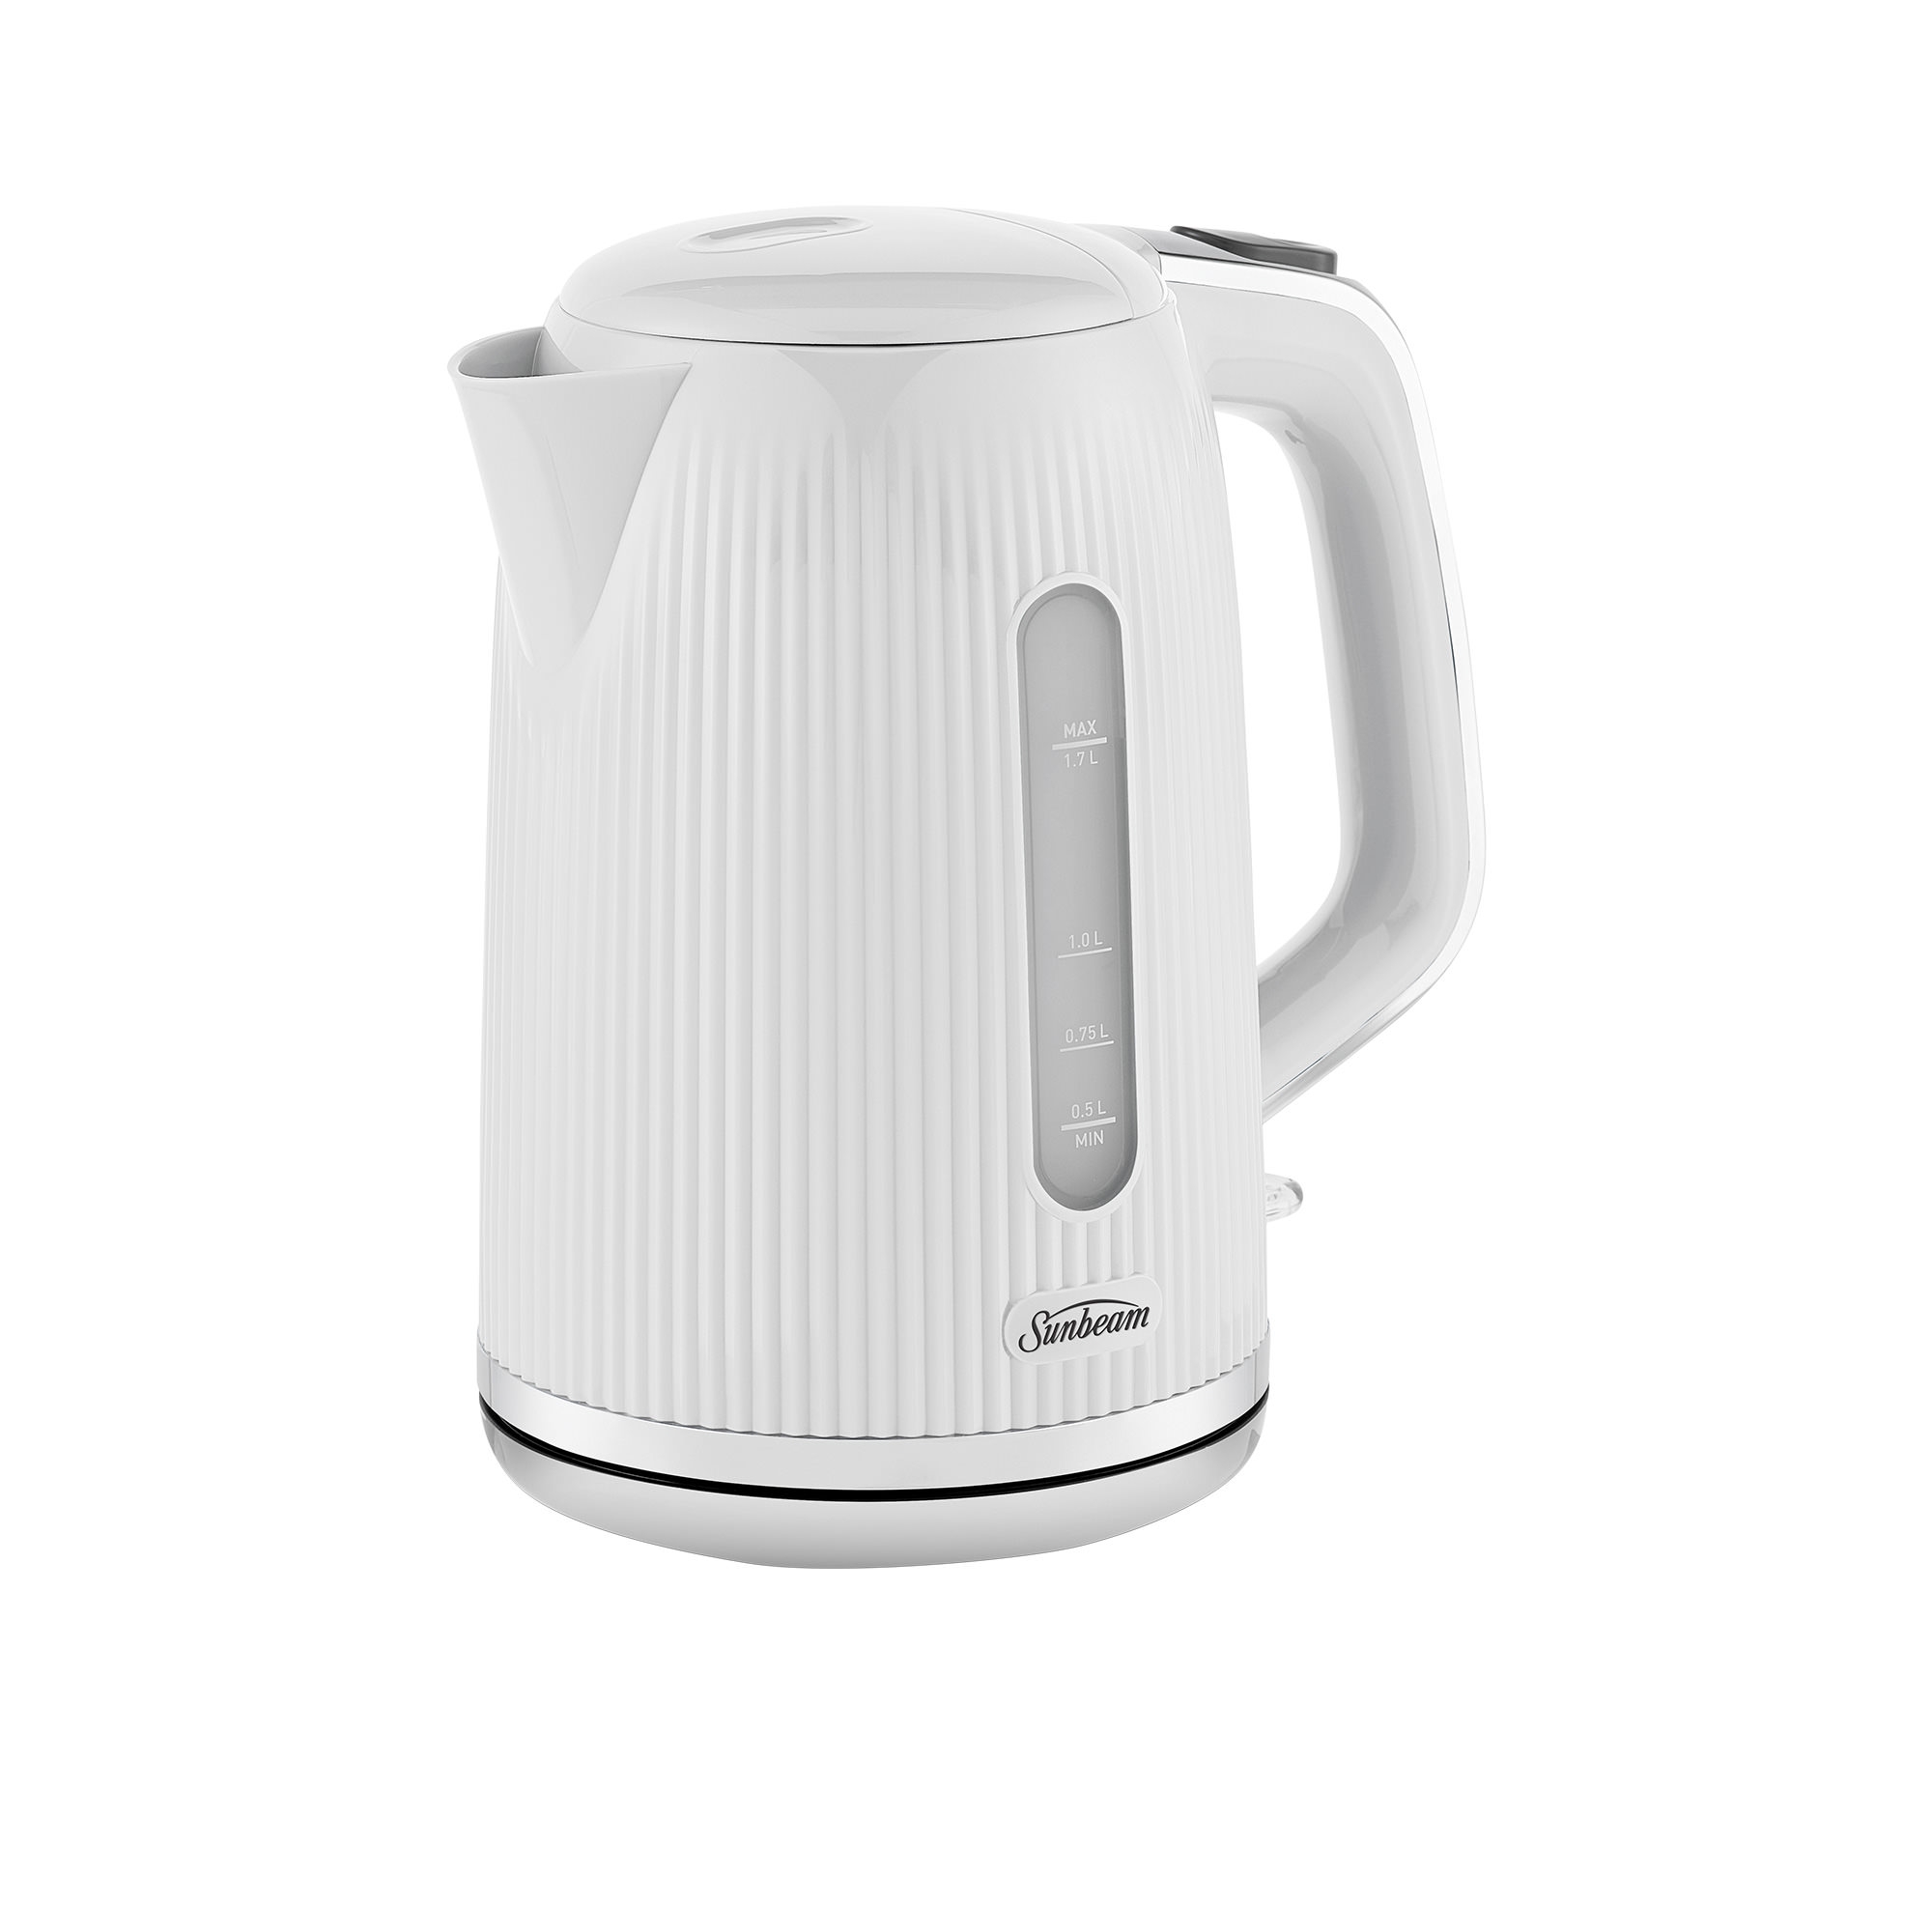 Sunbeam Brightside KEP1007WH Electric Kettle 1.7L White Image 2